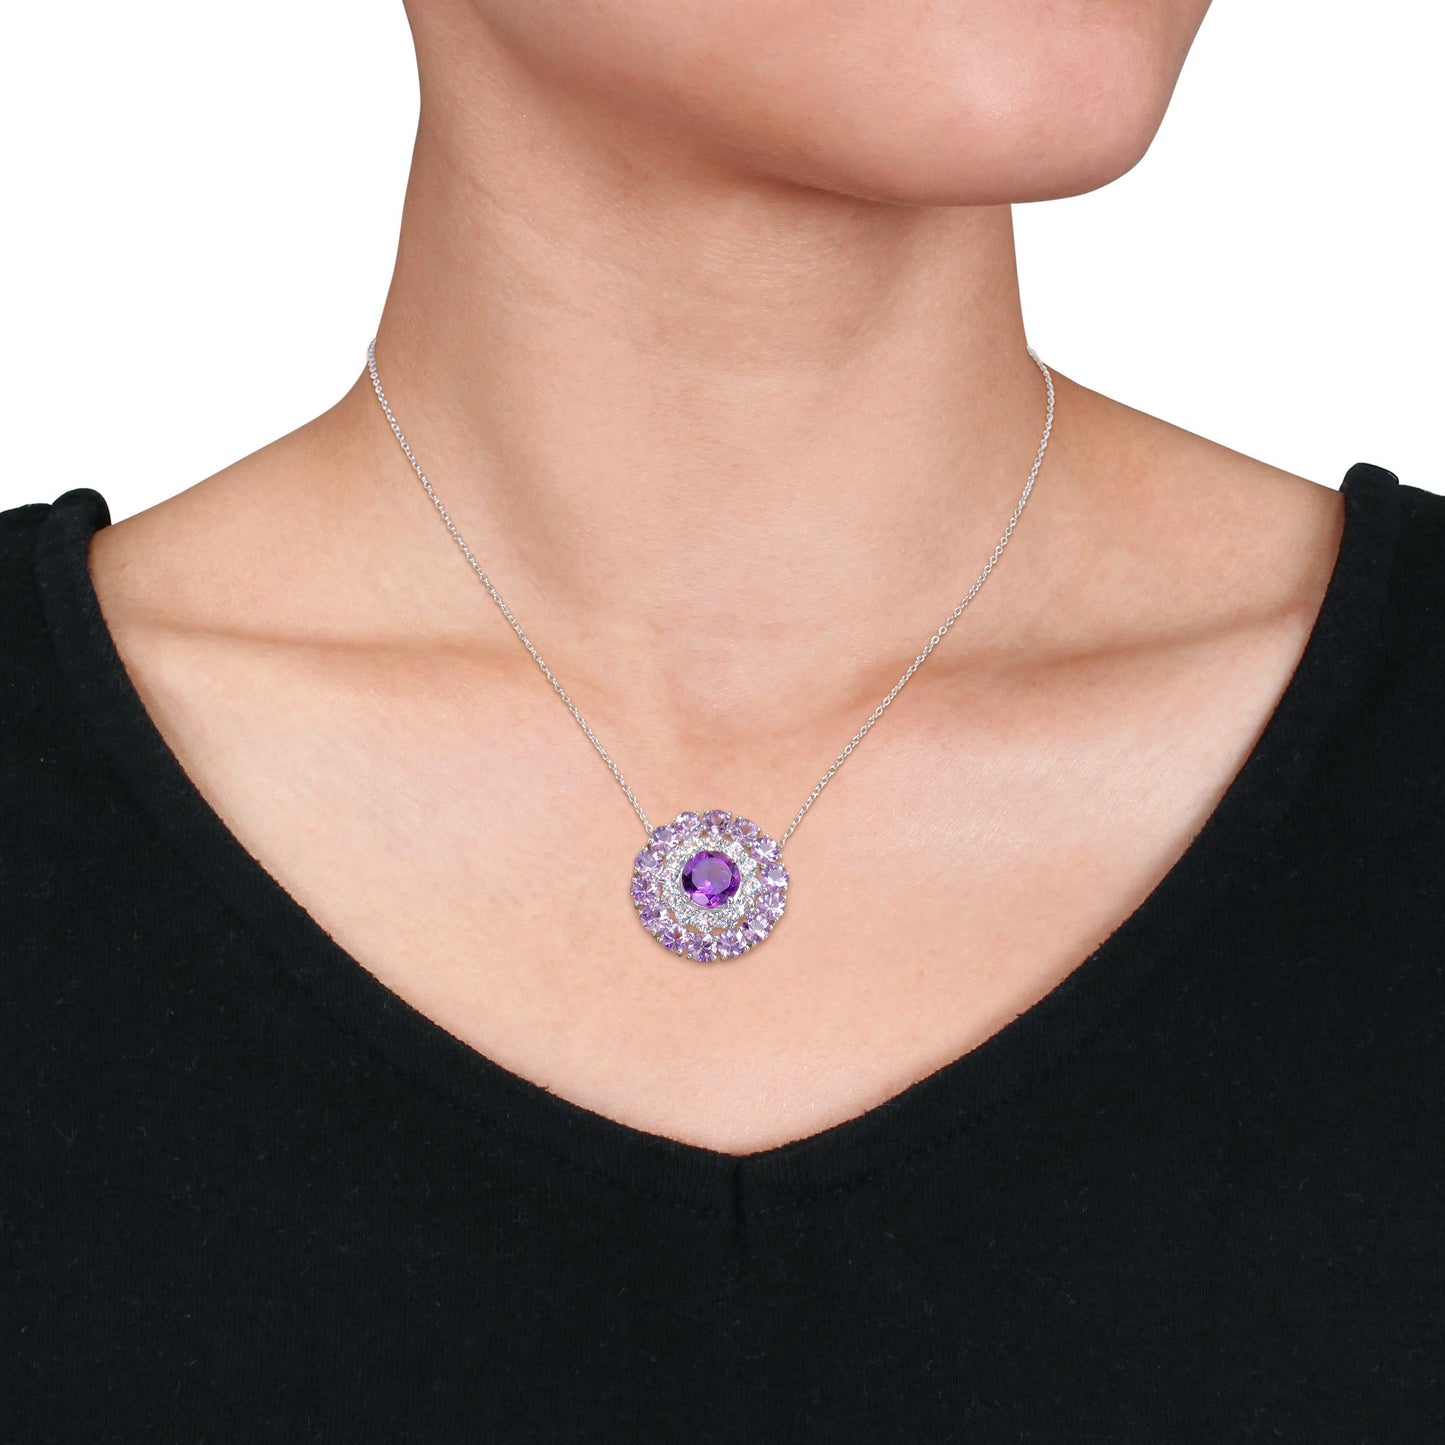 11 1/4ct Amethyst & White Topaz Double Halo Necklace in Sterling Silver